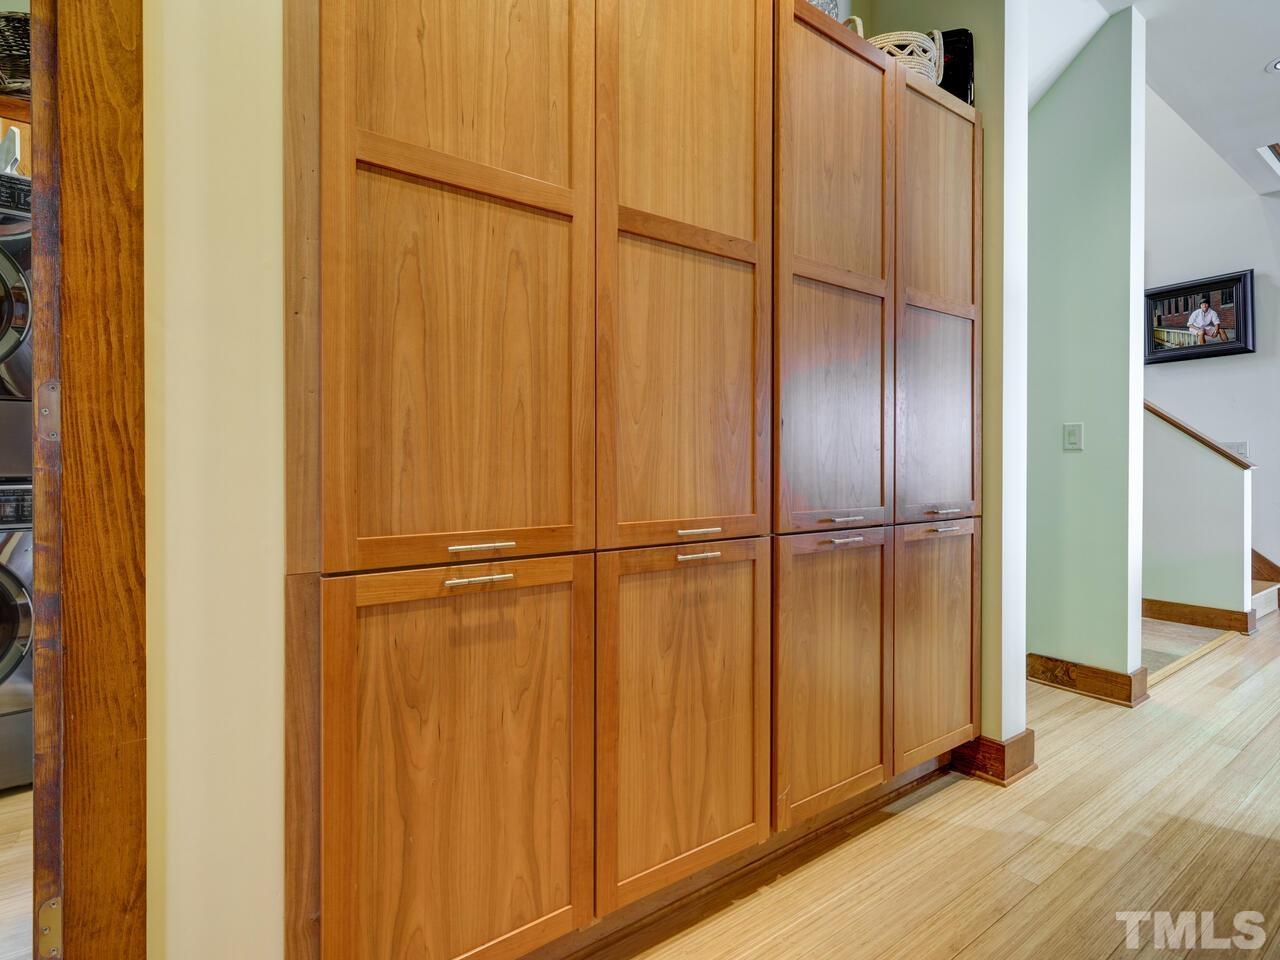 Pantry Storage for the Kitchen as you come in from the side door